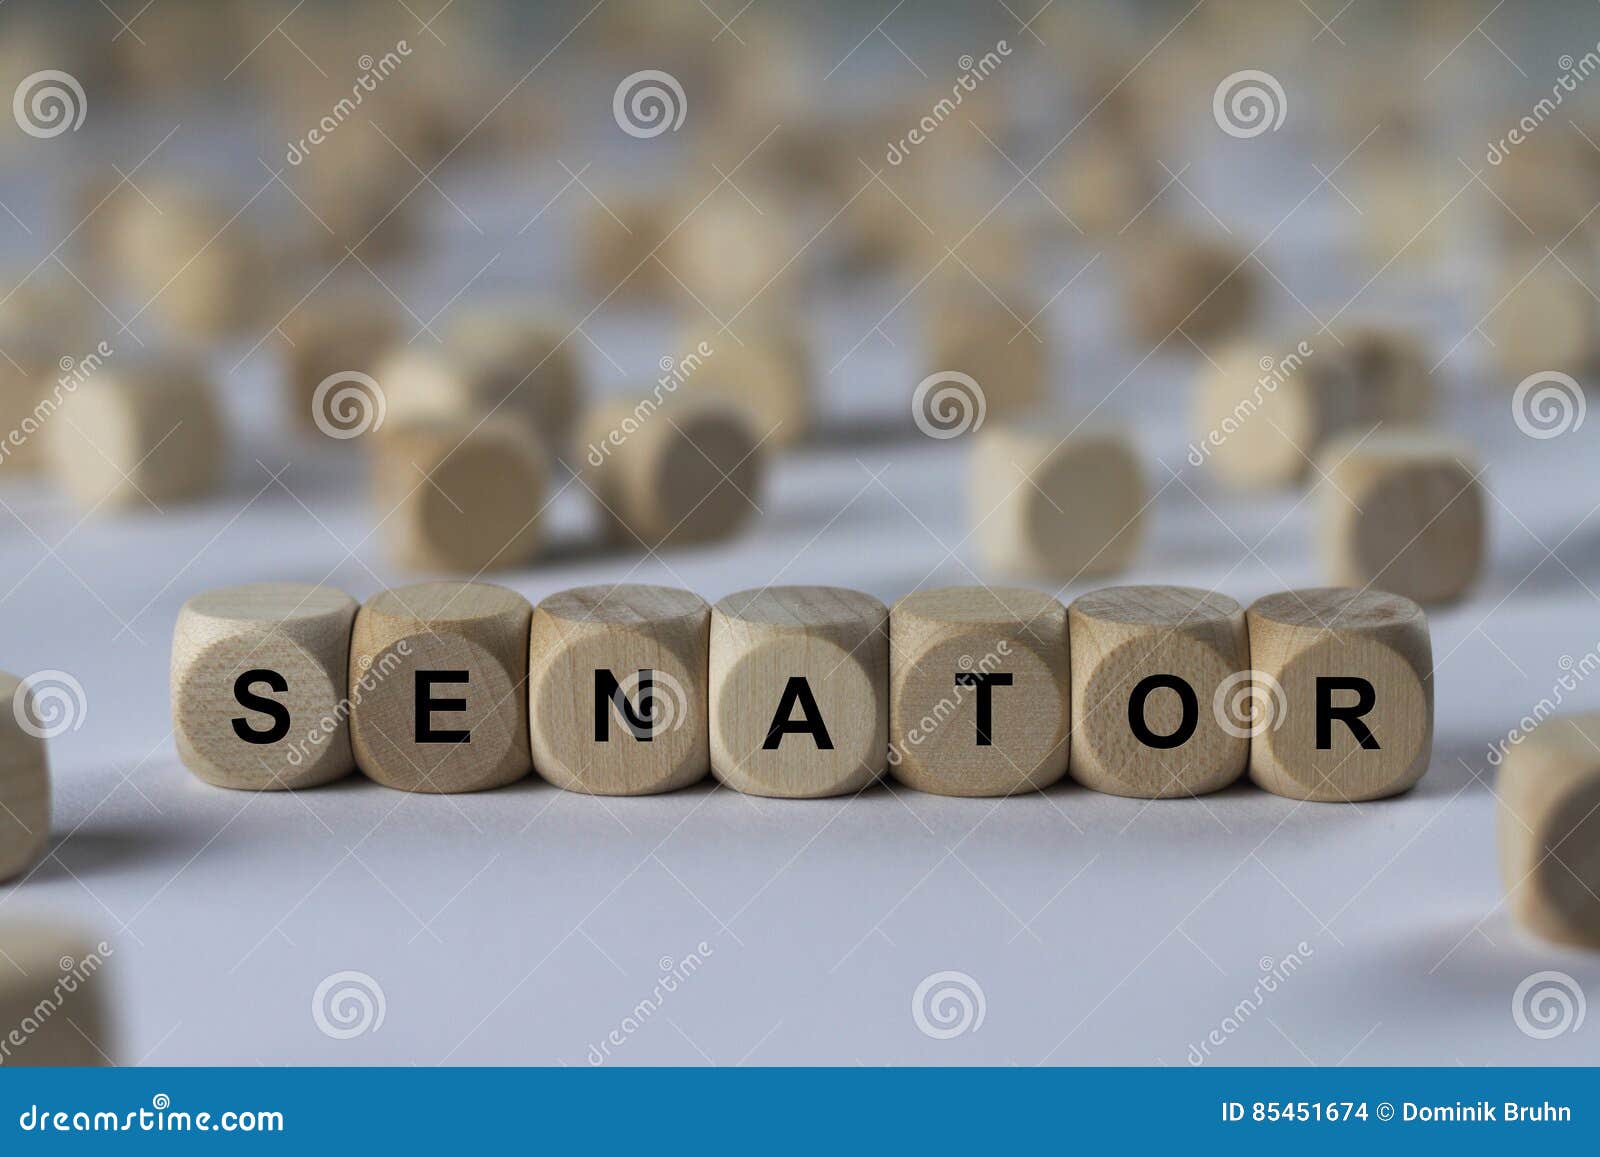 senator - cube with letters, sign with wooden cubes